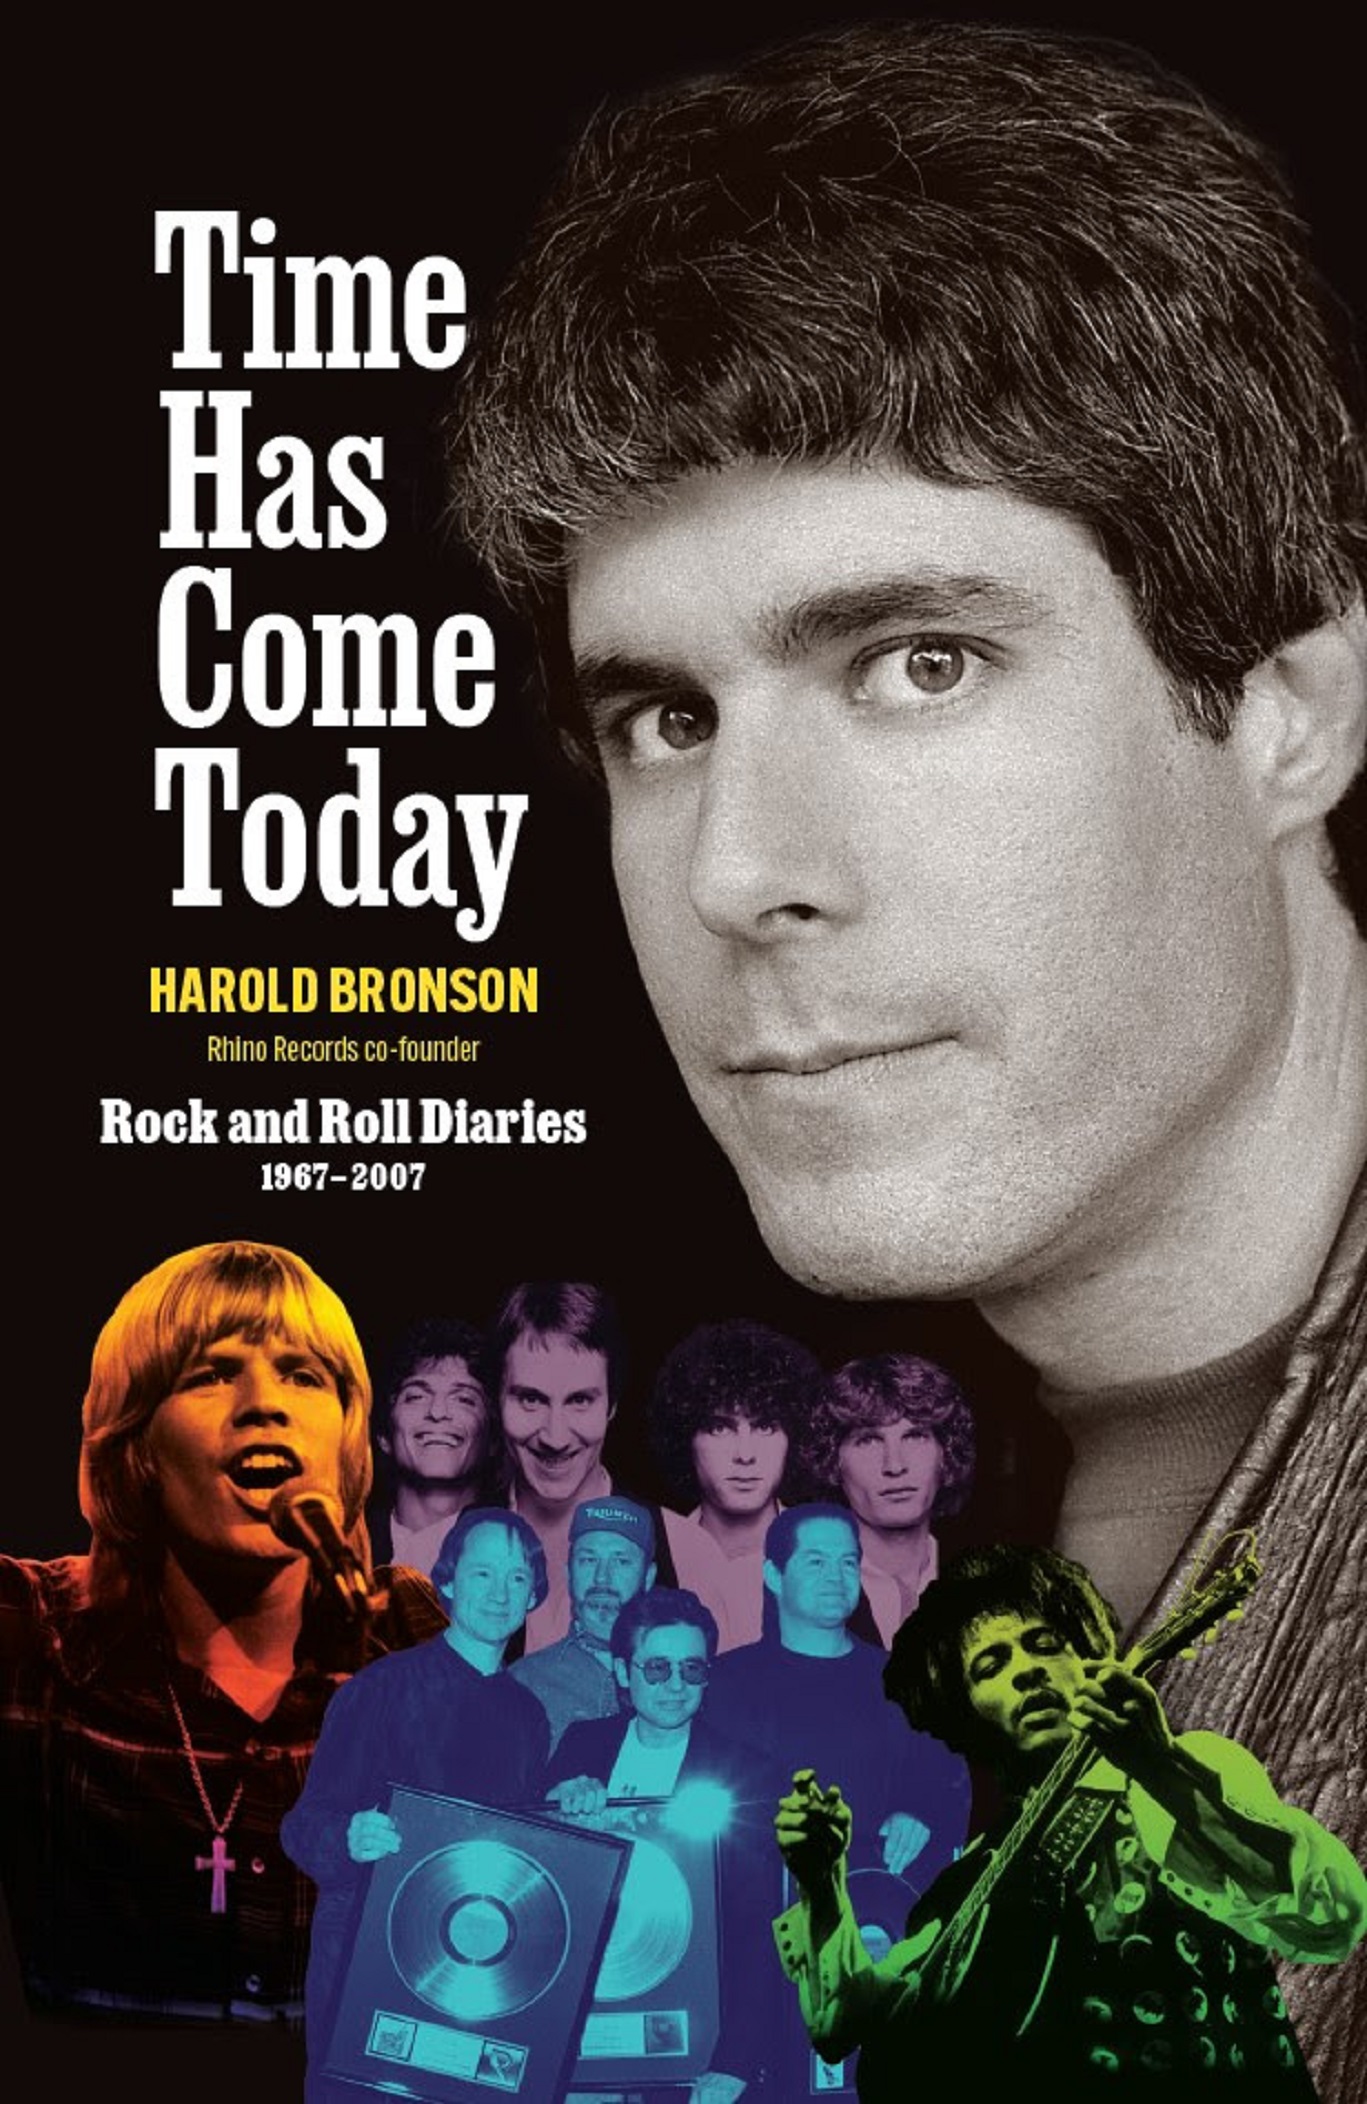 EARLY PRAISE FOR TIME HAS COME TODAY ROCK AND ROLL DIARIES 1967 – 2007 BY HAROLD BRONSON